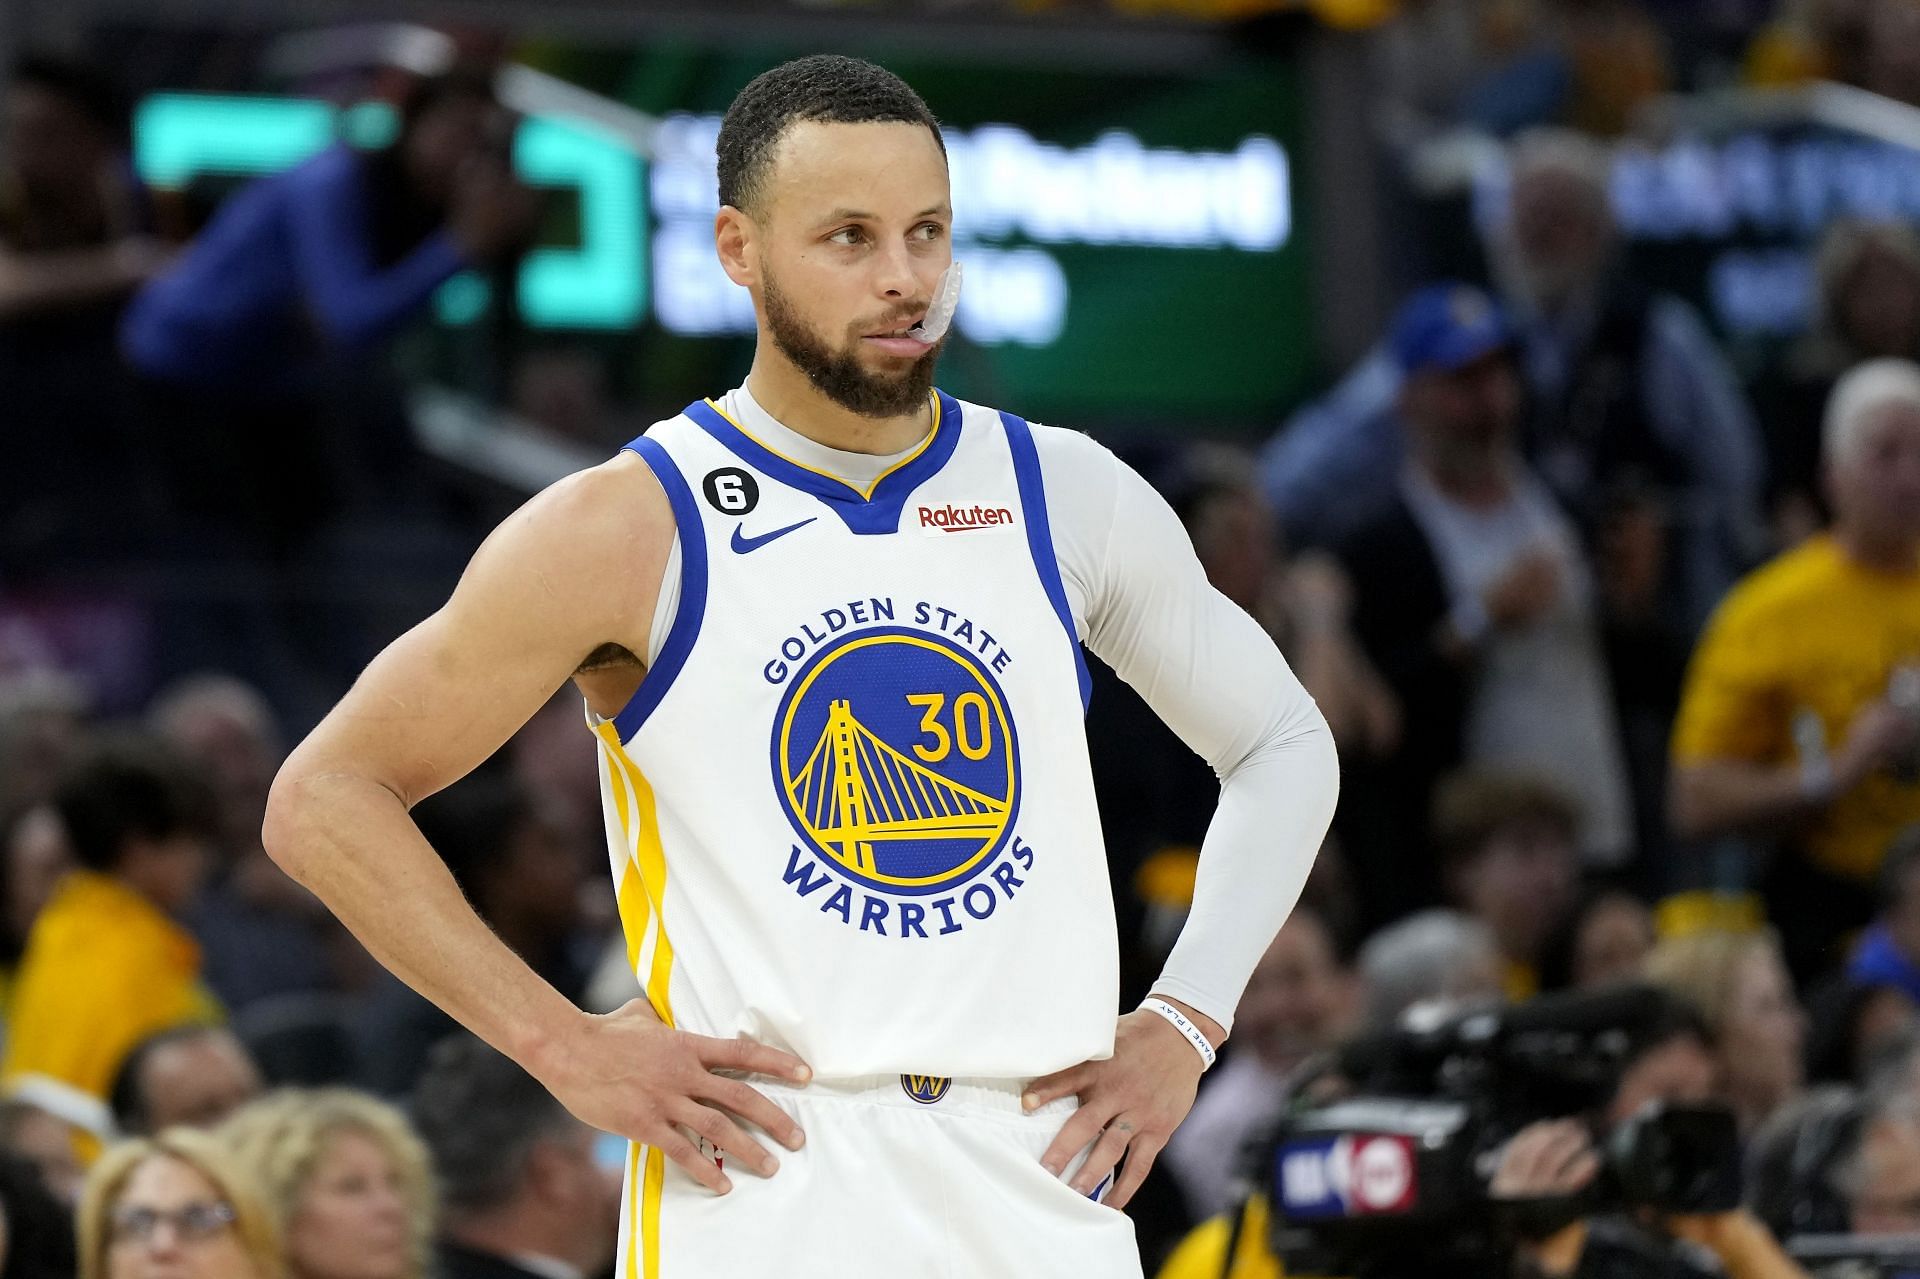 5 reasons why Steph Curry may never win an NBA championship again